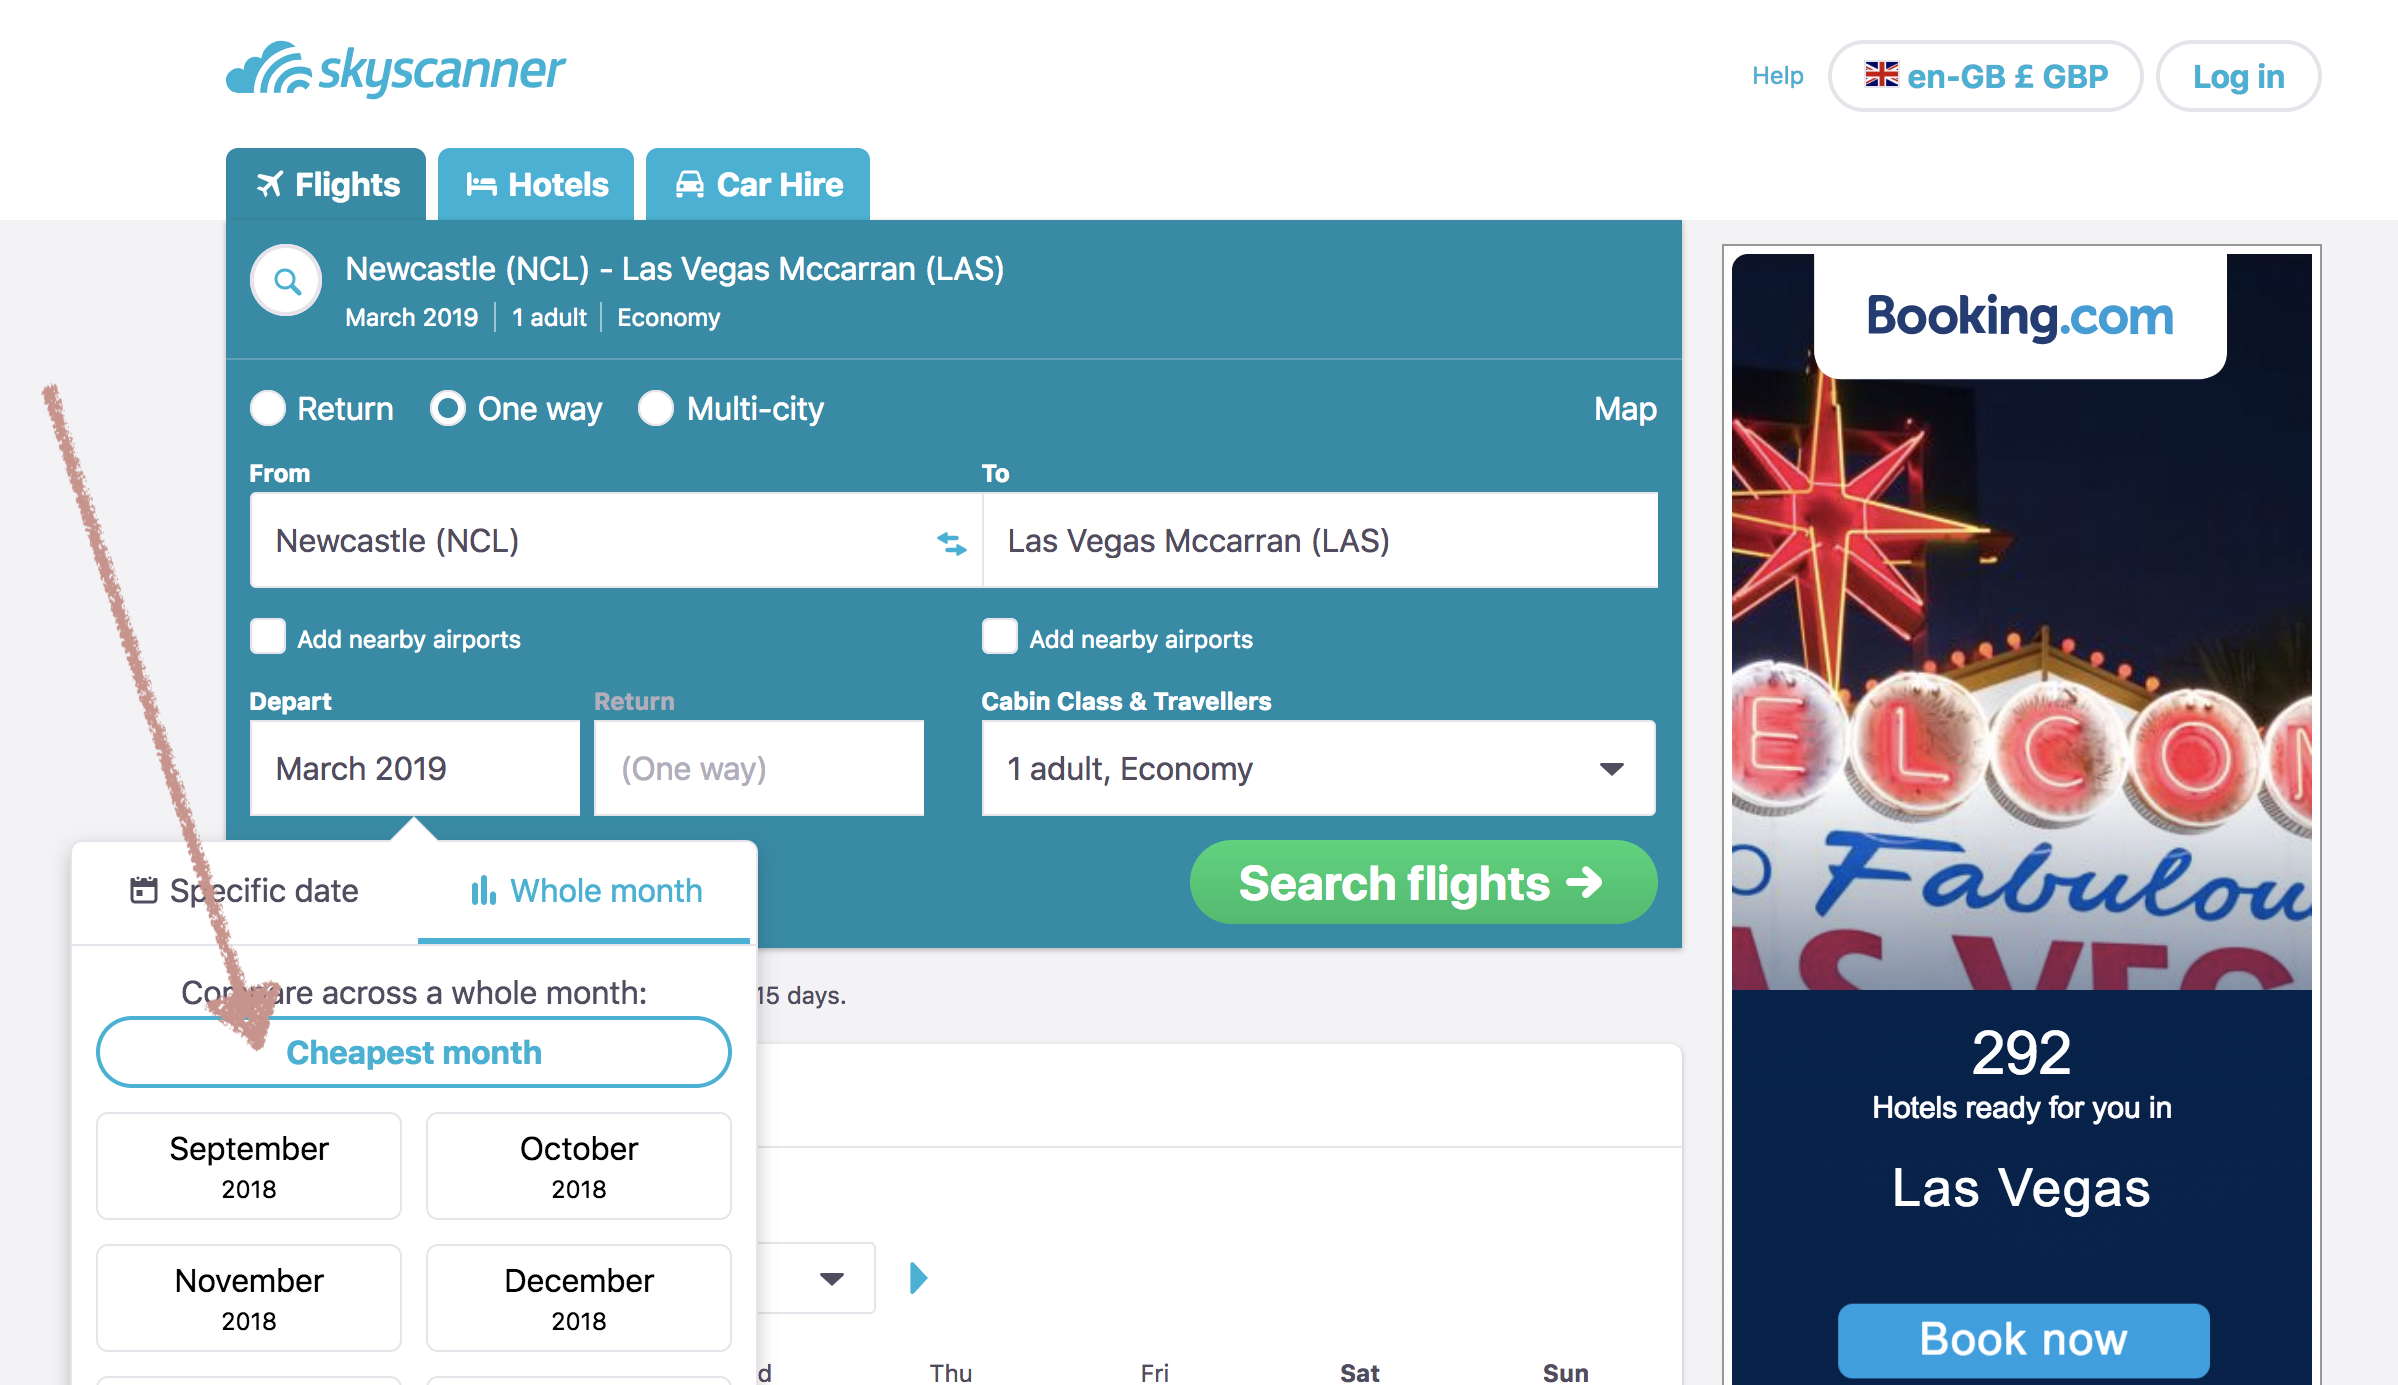 Skyscanner Search - cheapest month | How to find cheap flights and holidays online | Travel tips and tricks, guide | The Social Media Virgin Travel and Lifestyle Blog